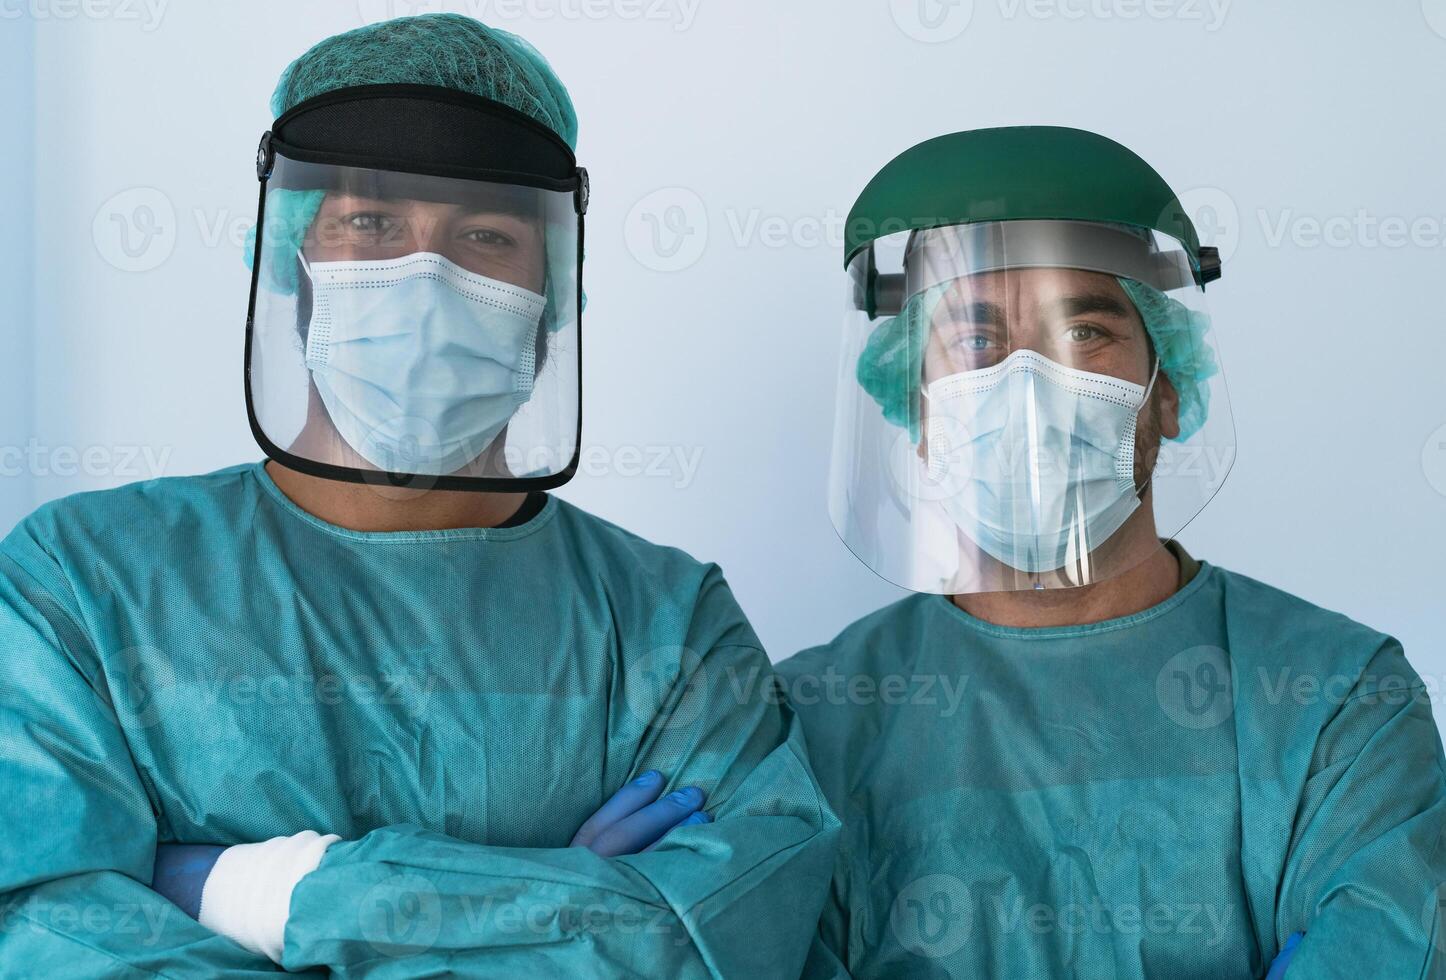 Doctors wearing personal protective equipment fighting against corona virus outbreak - Health care and medical workers concept photo